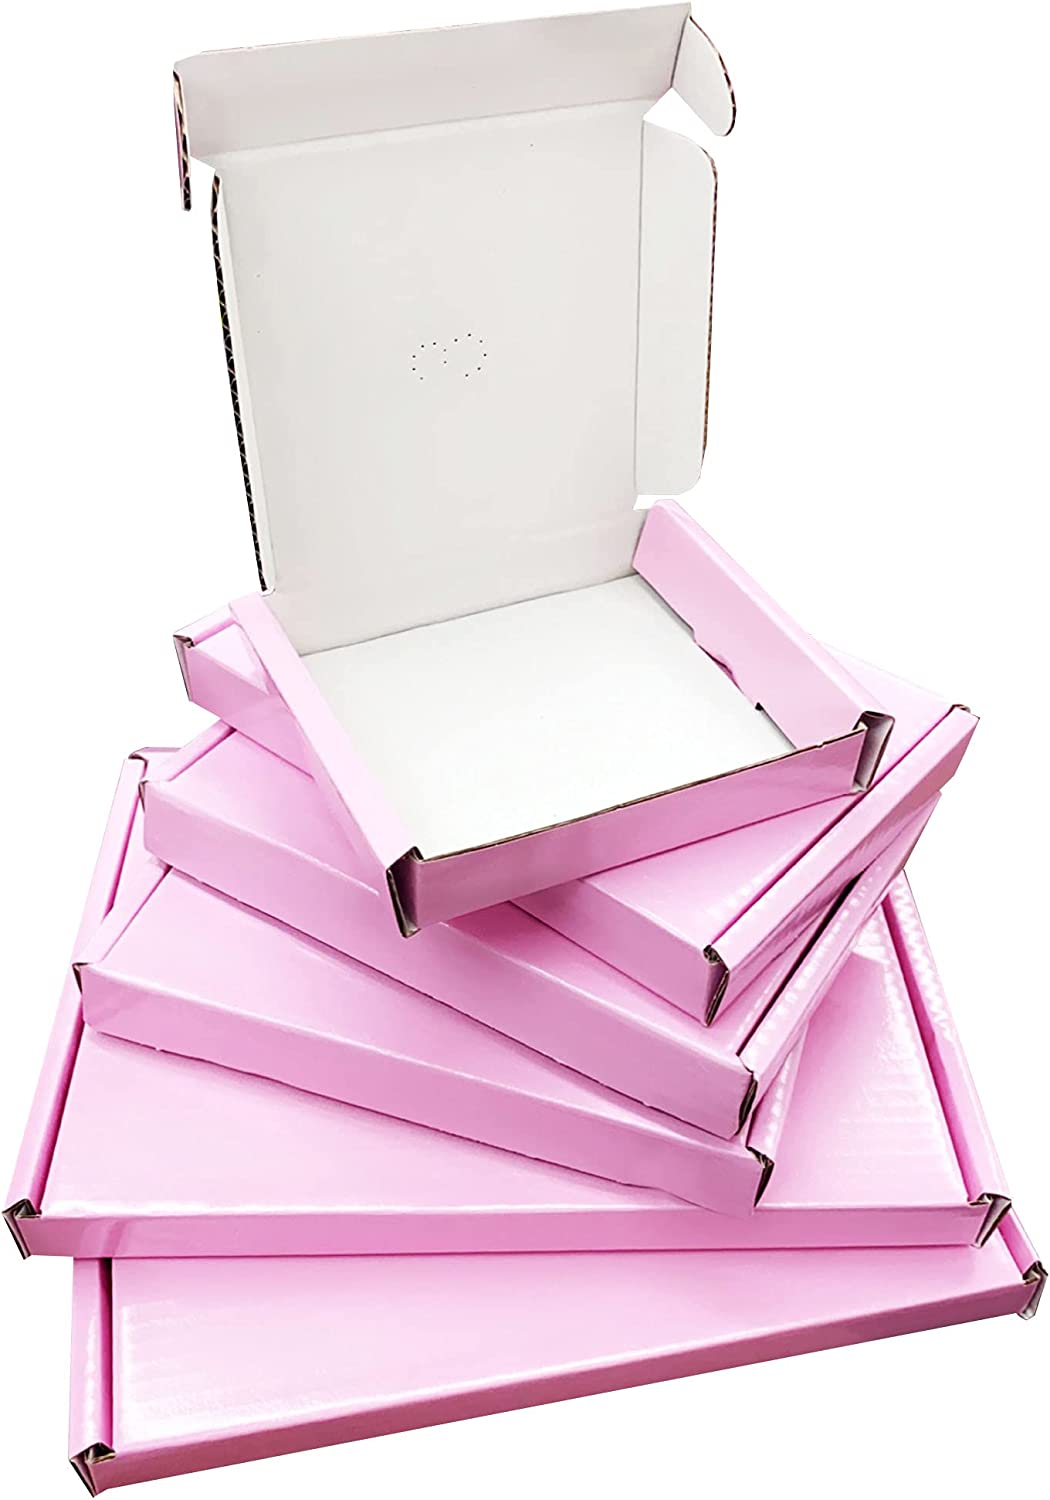 Bright Pink Postal Packing Shipping Die Cut Boxes C4 C5 C6 & Mini Size